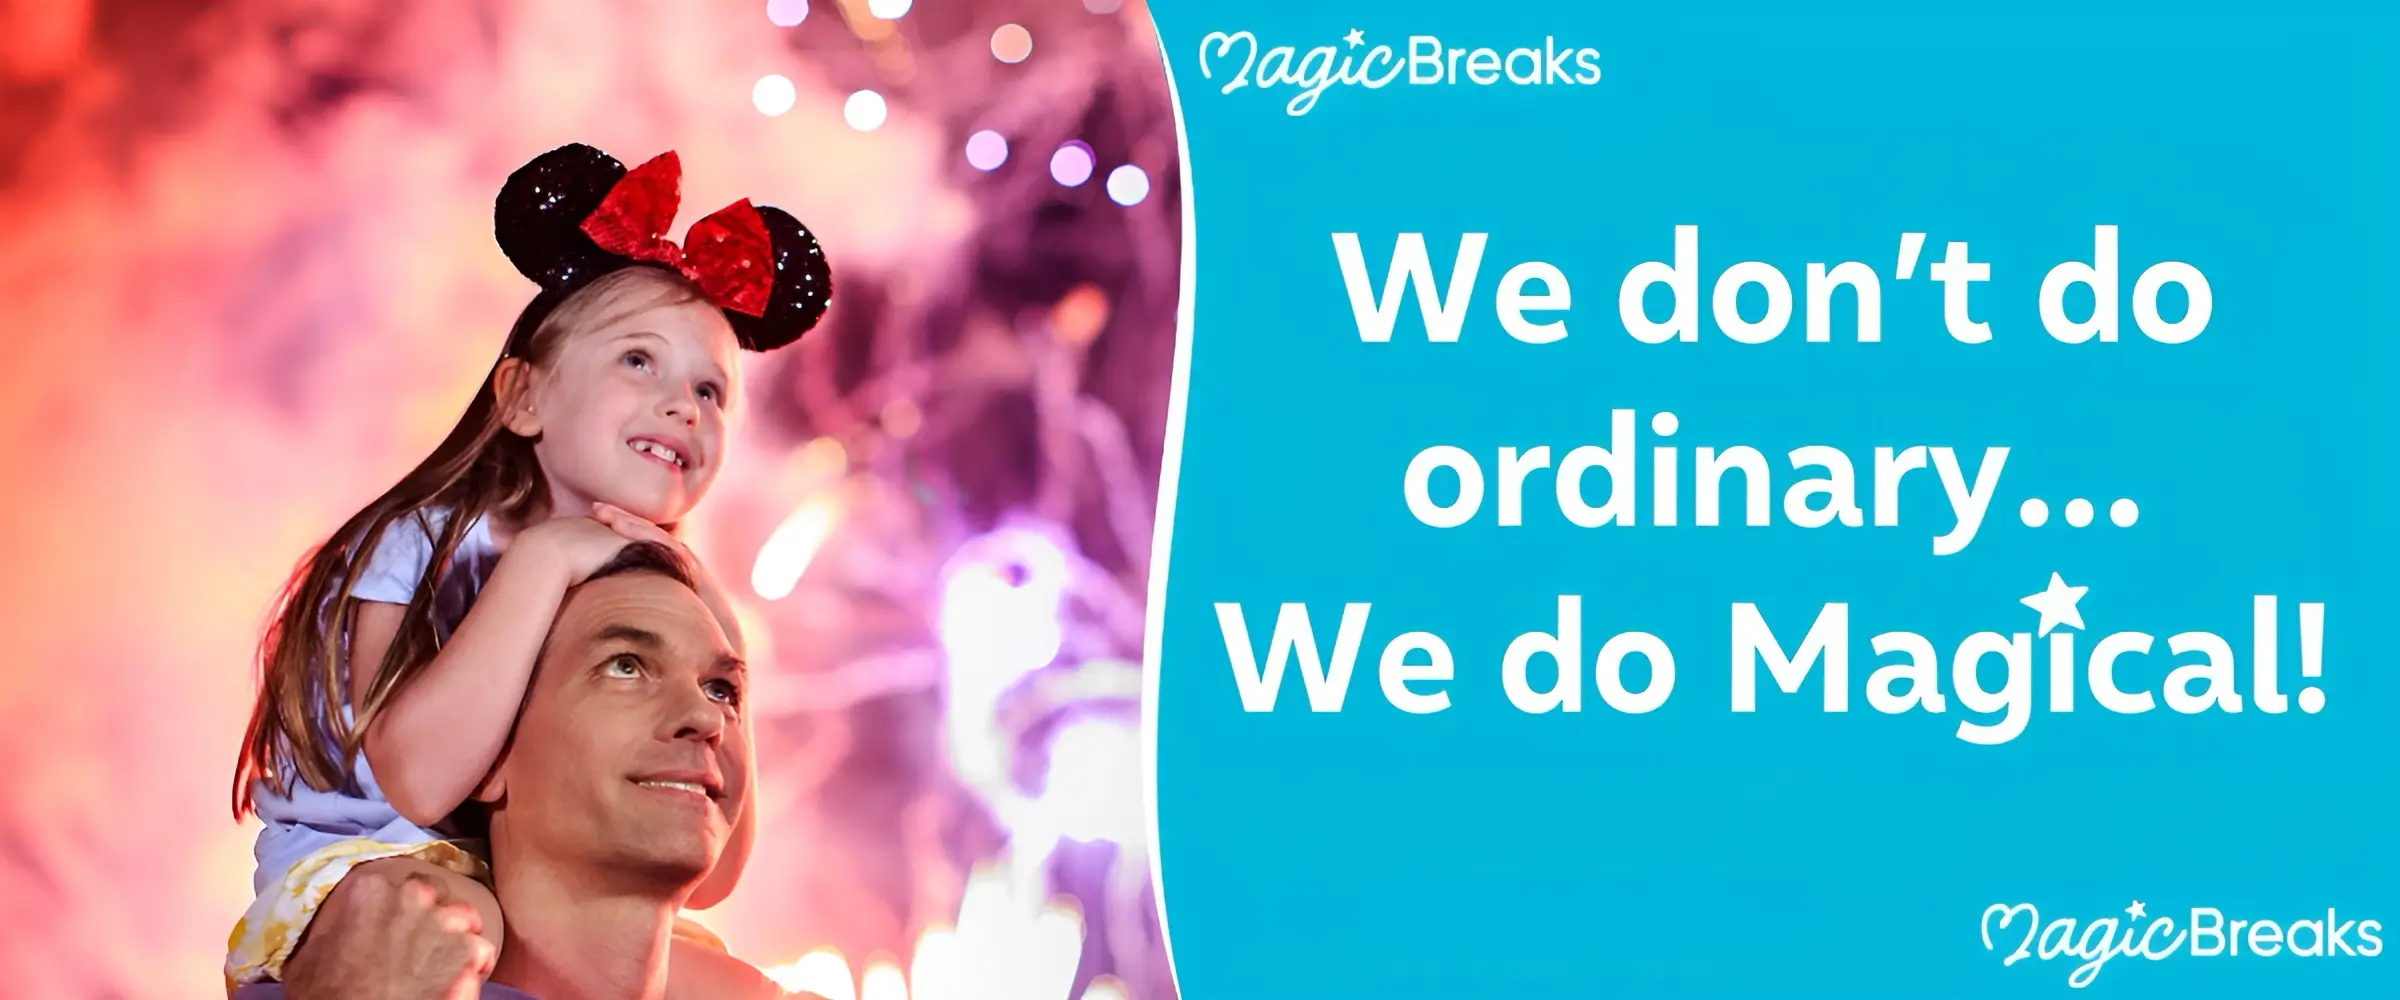 MagicBreaks We don't do ordinary... We do Magical! carousel banner